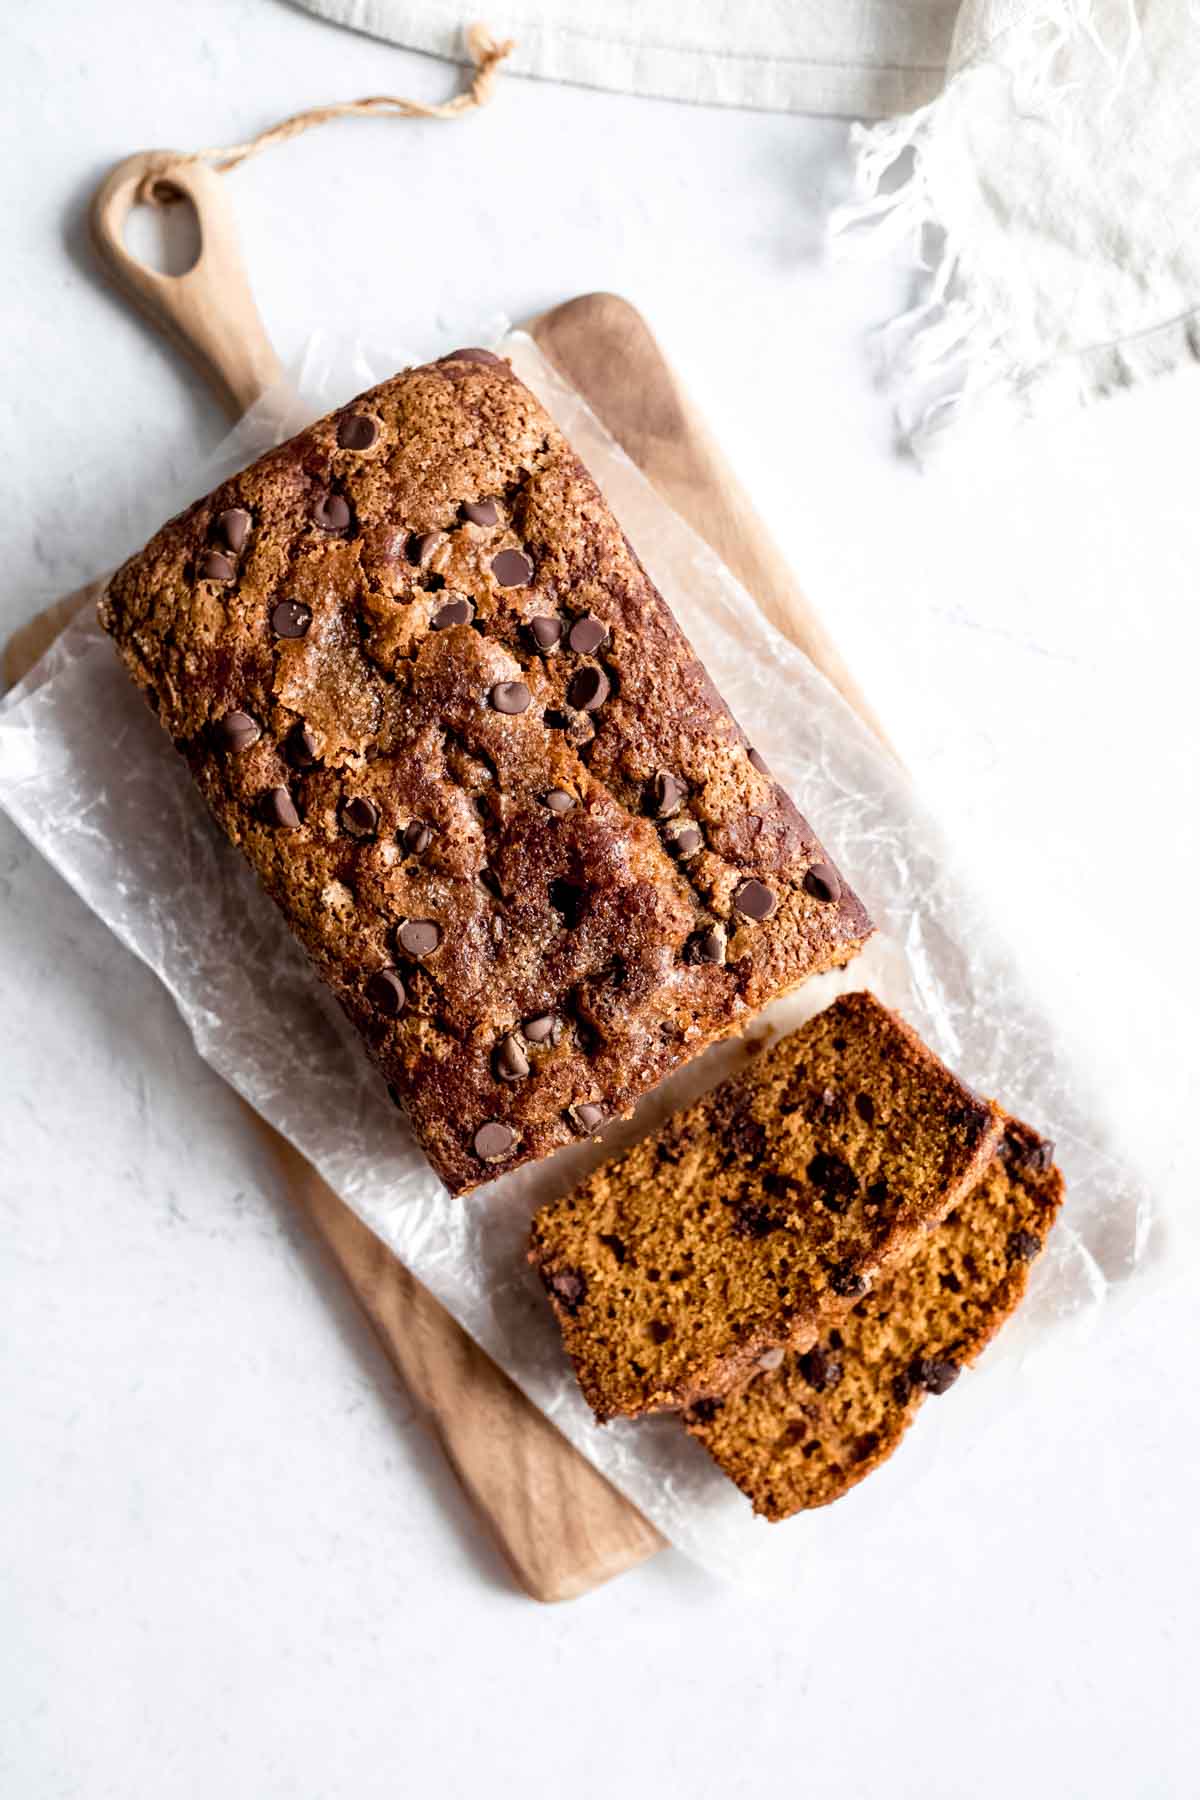 Chocolate Chip Pumpkin Bread just out of the oven